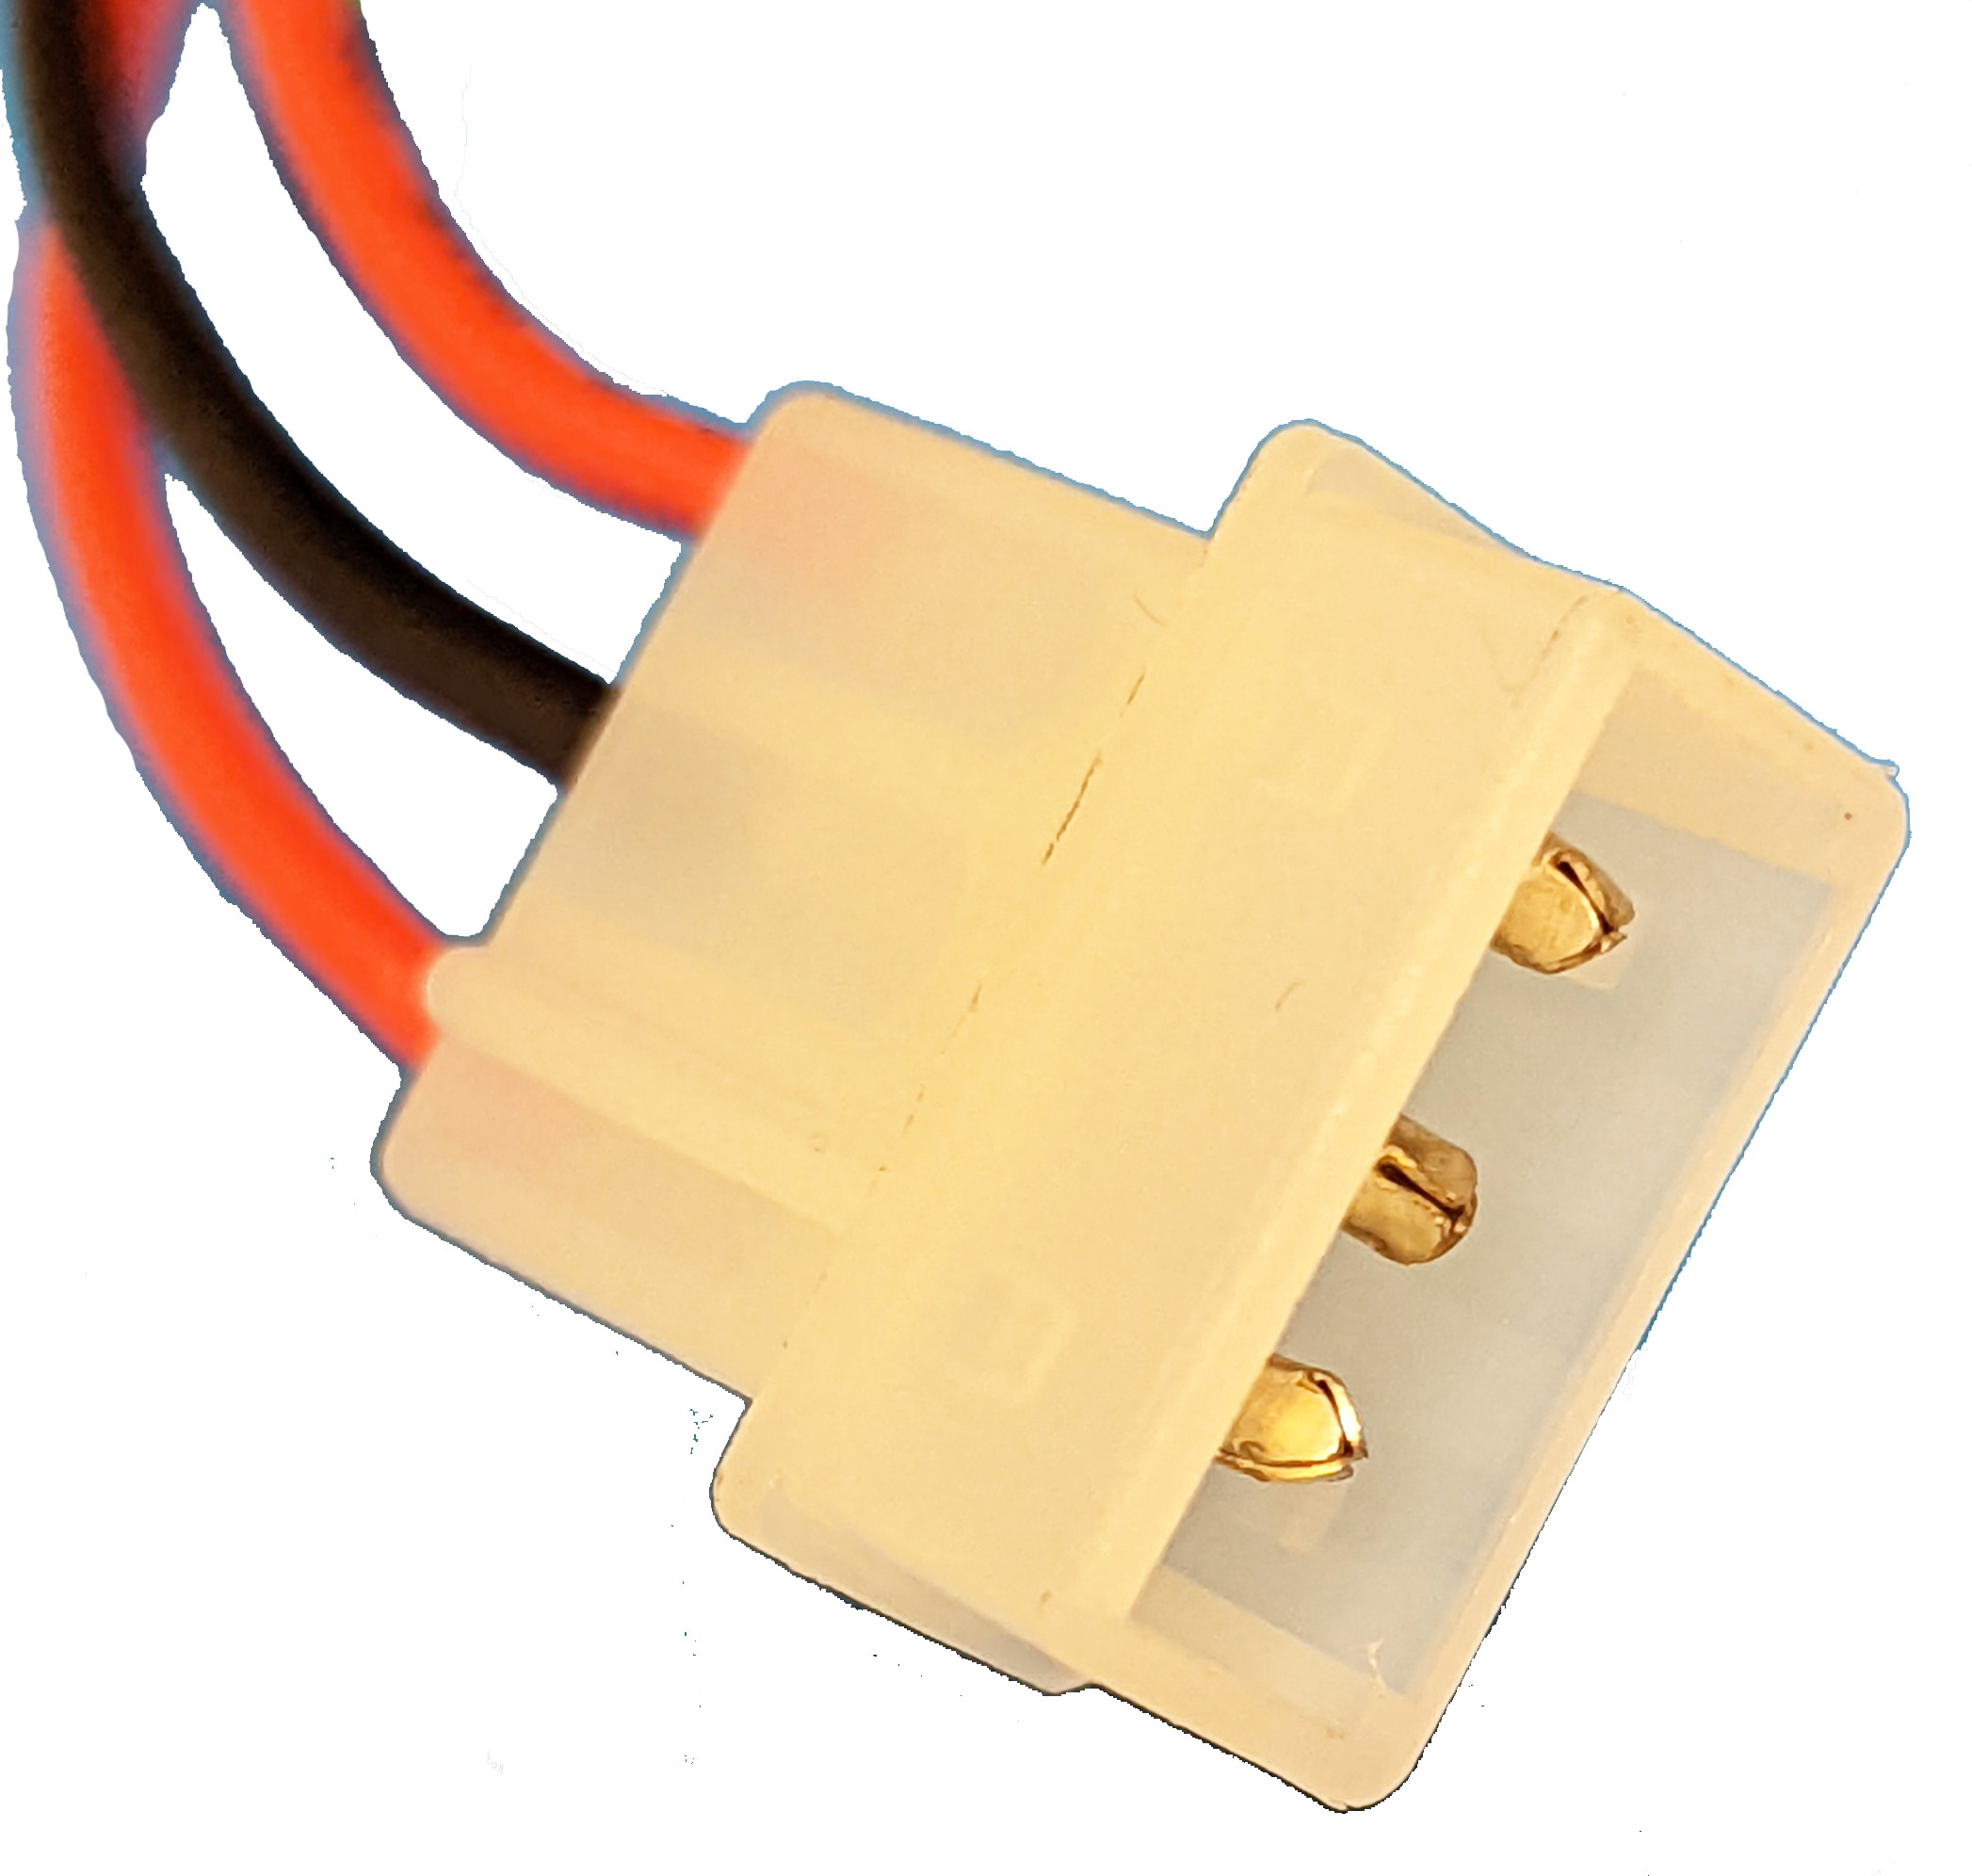  3 Wire Leads With 3-Pin CE8981 Connector